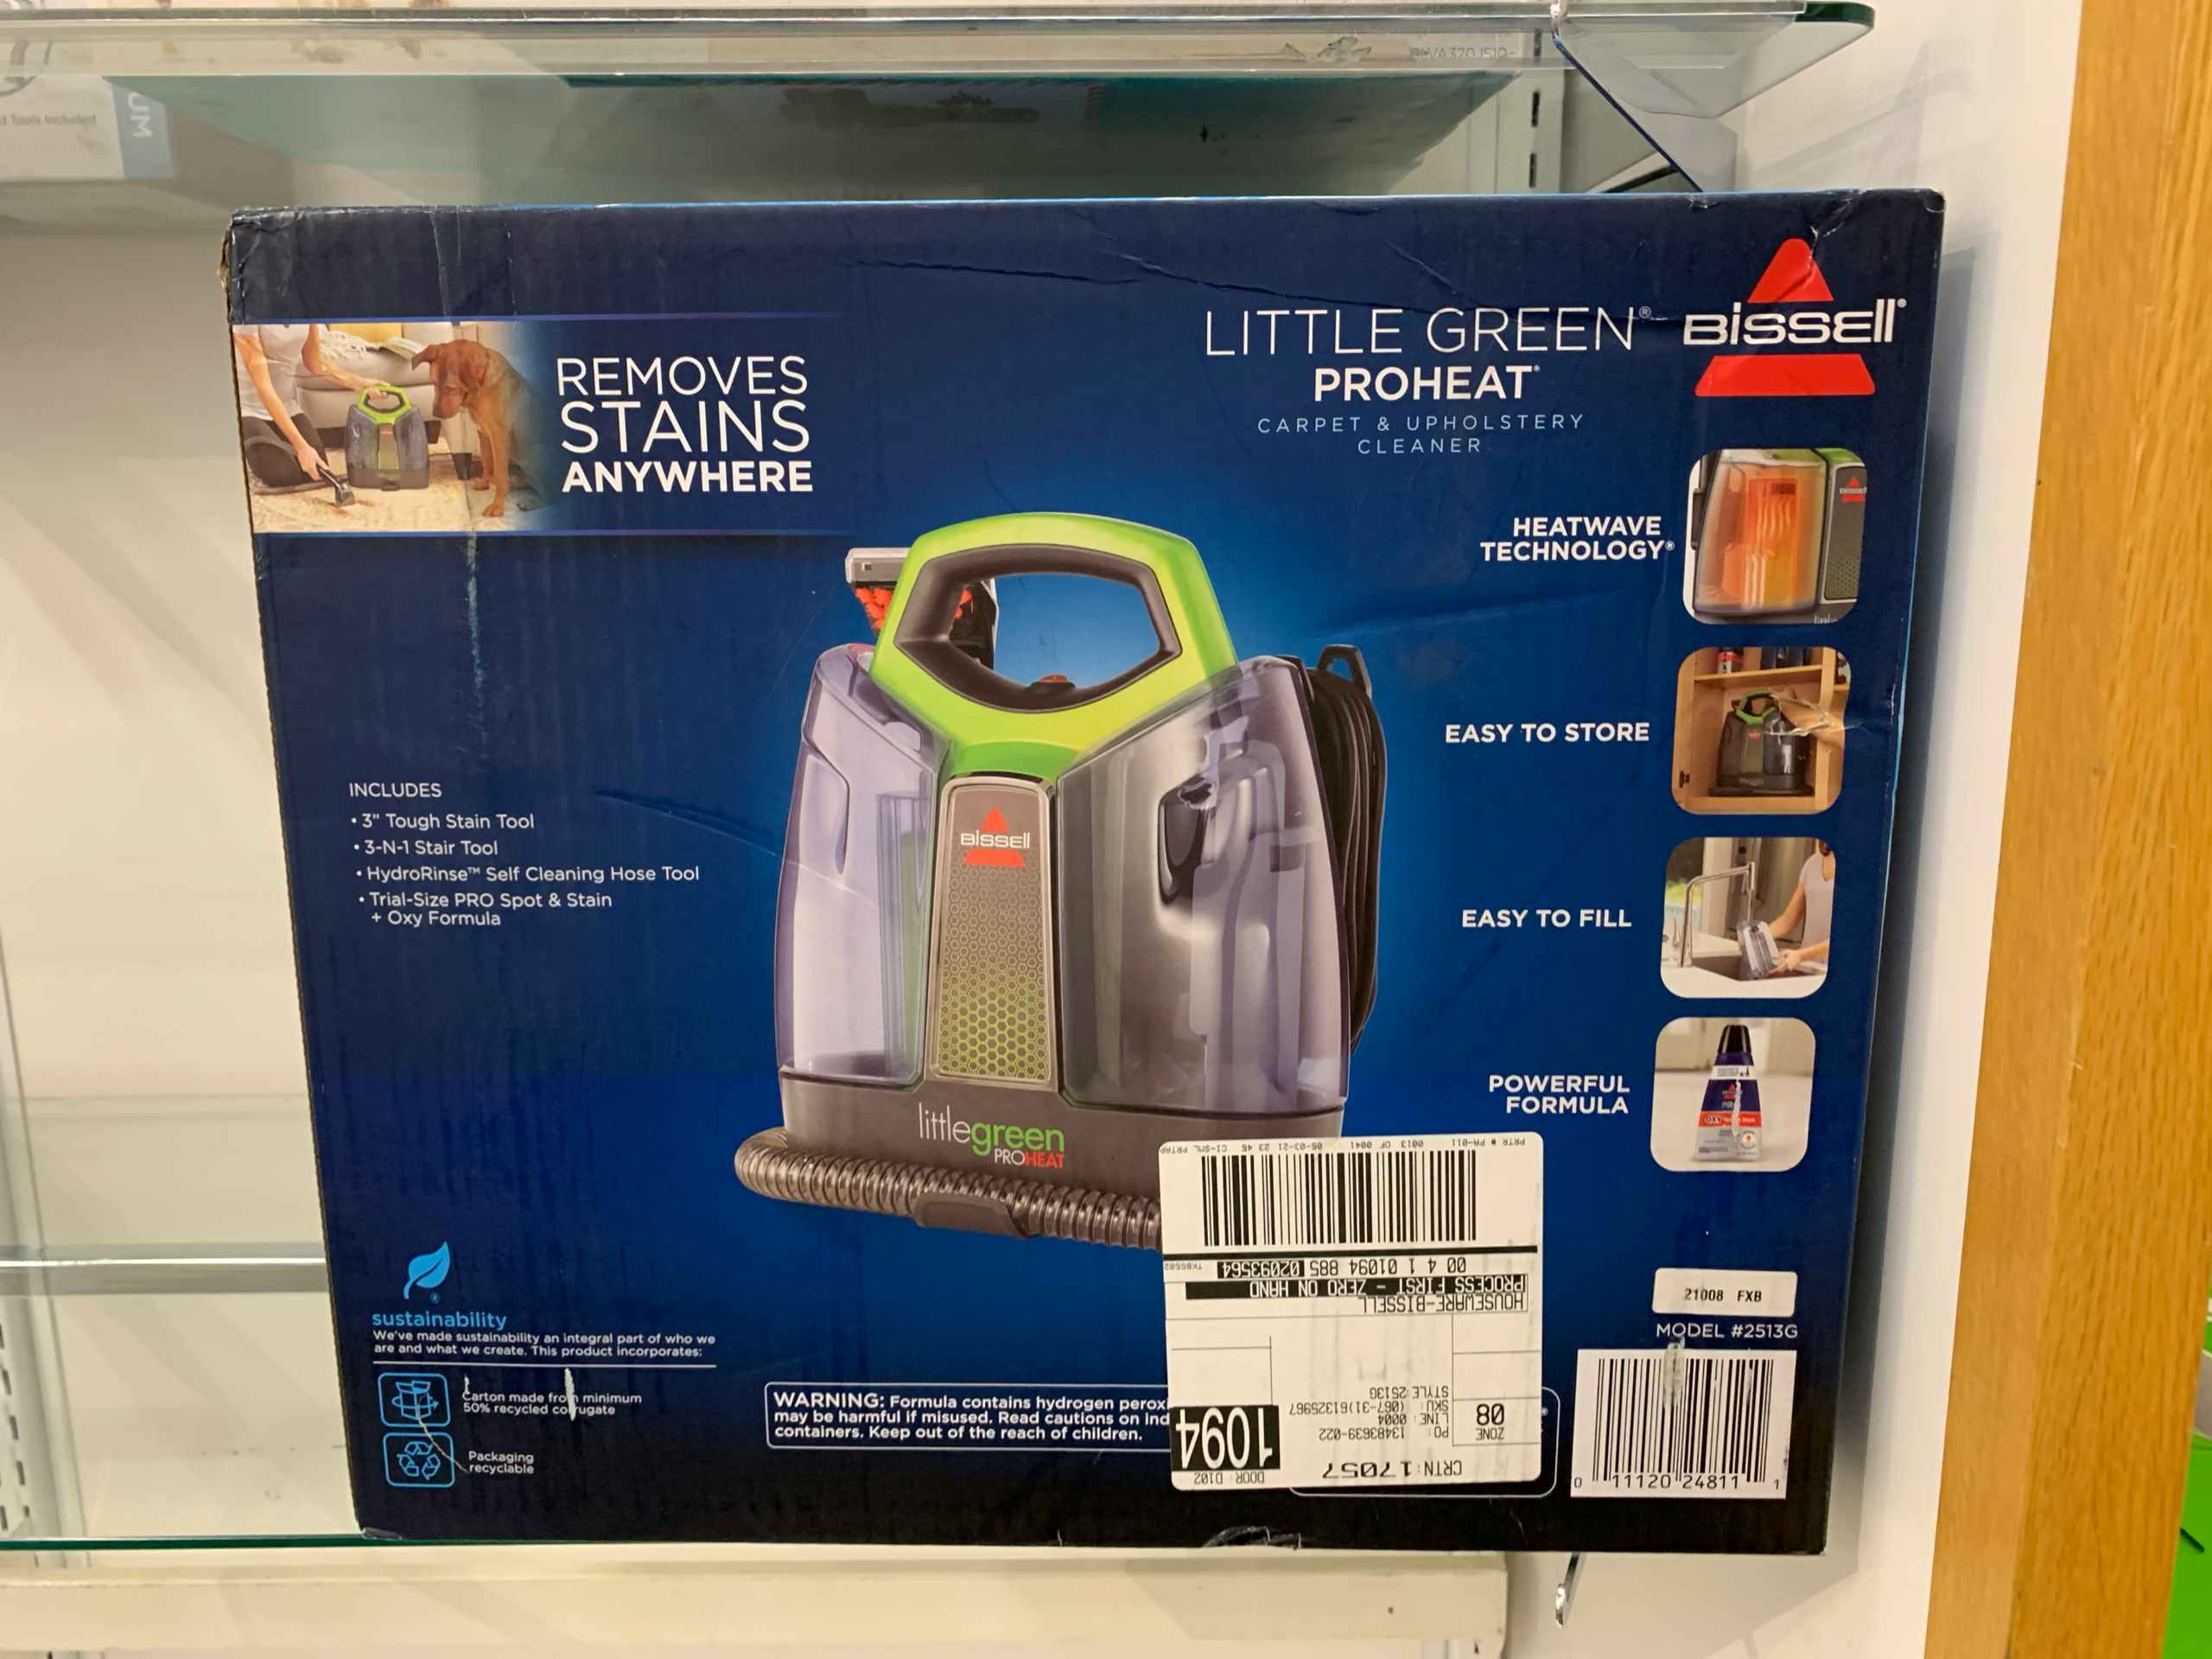 kohls bissell little green carpet cleaning machine in store image 2021 3